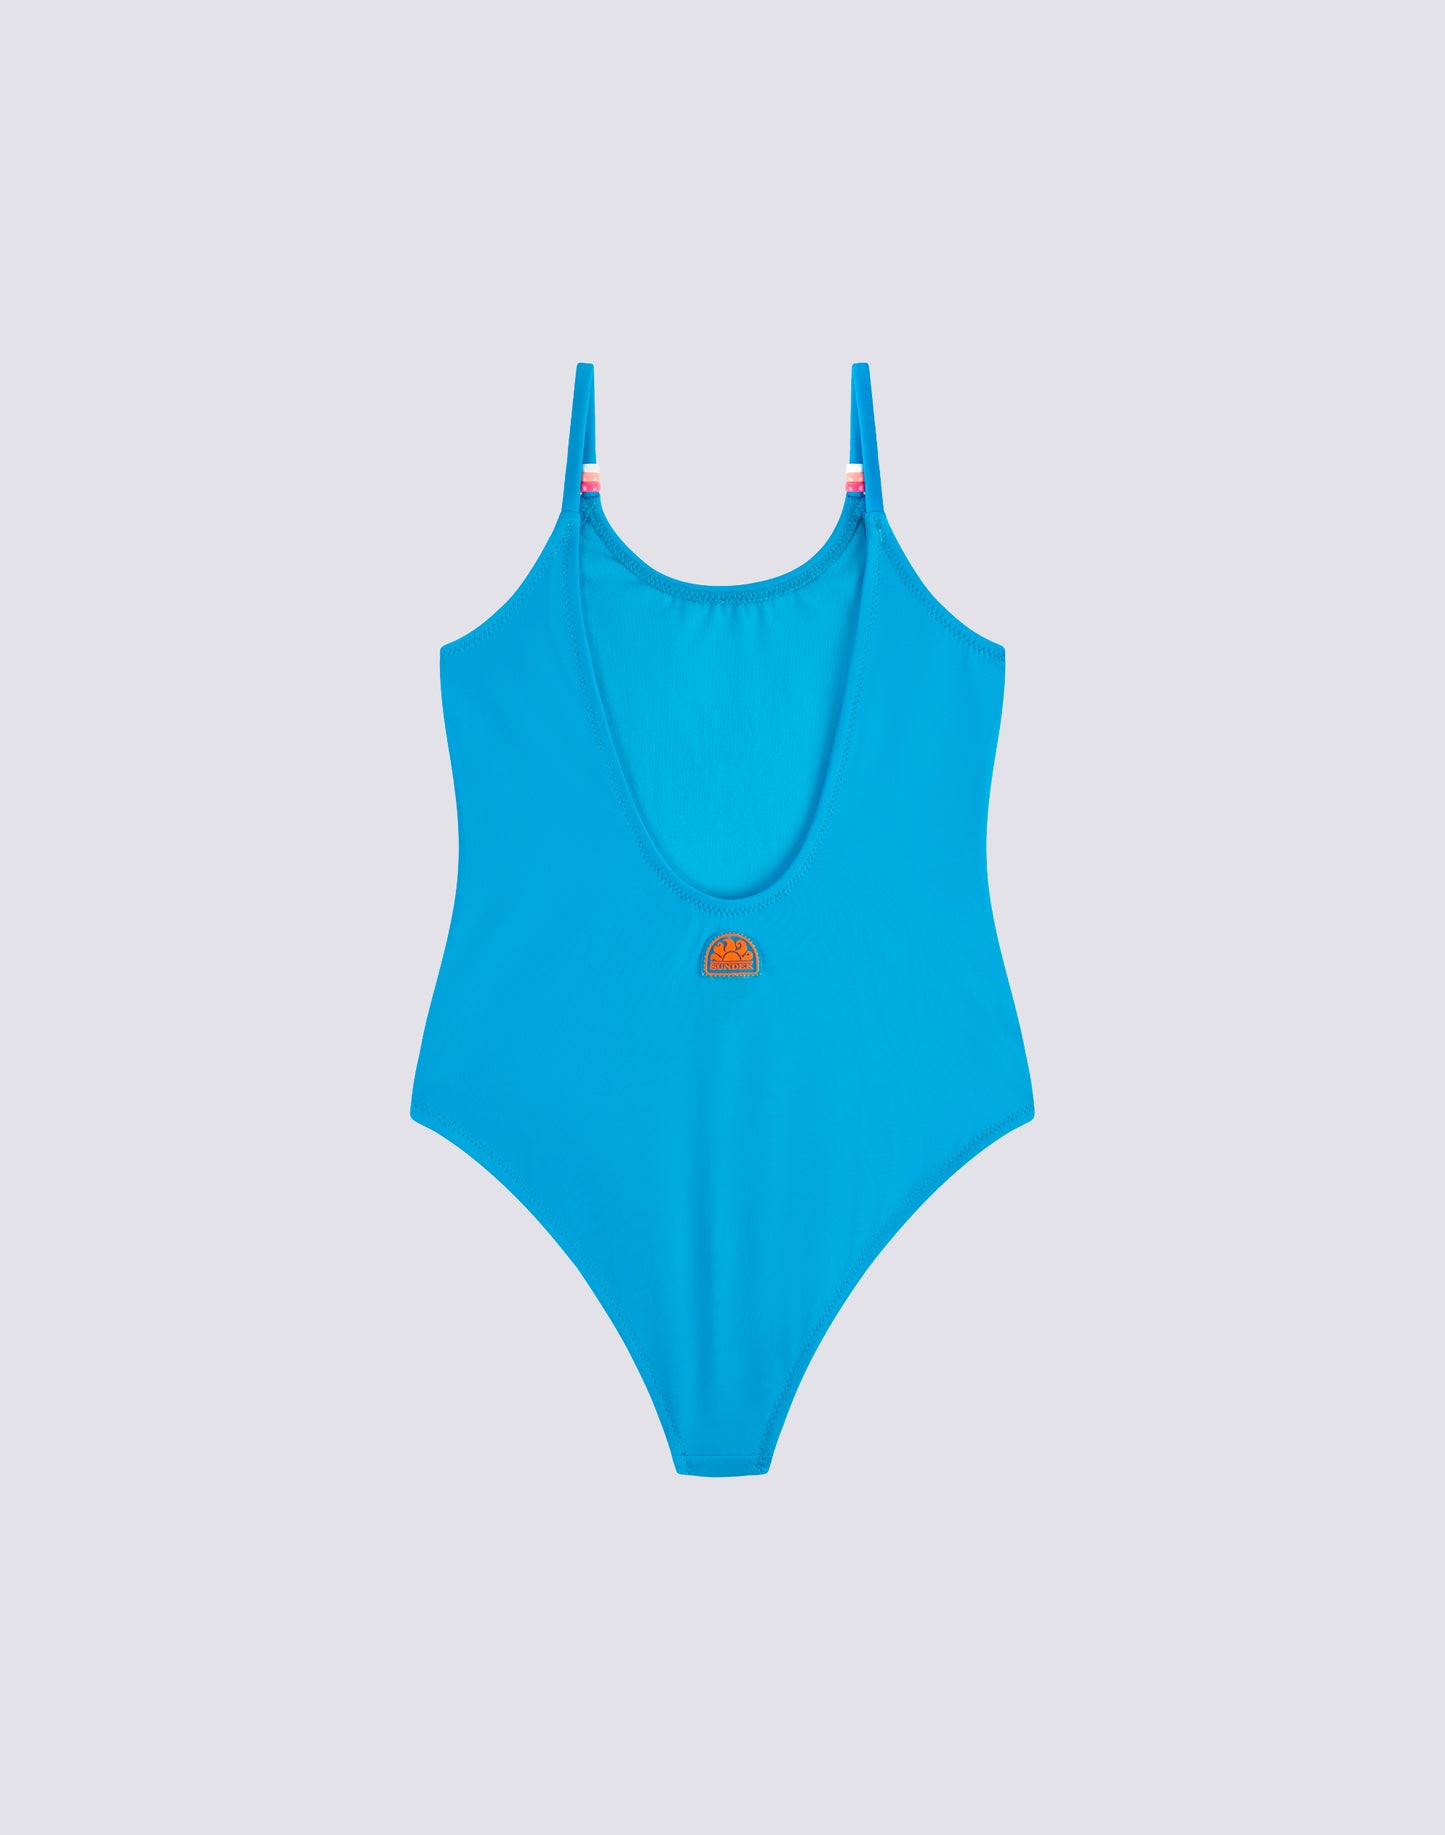 GIRL'S ONE-PIECE SWIMSUIT